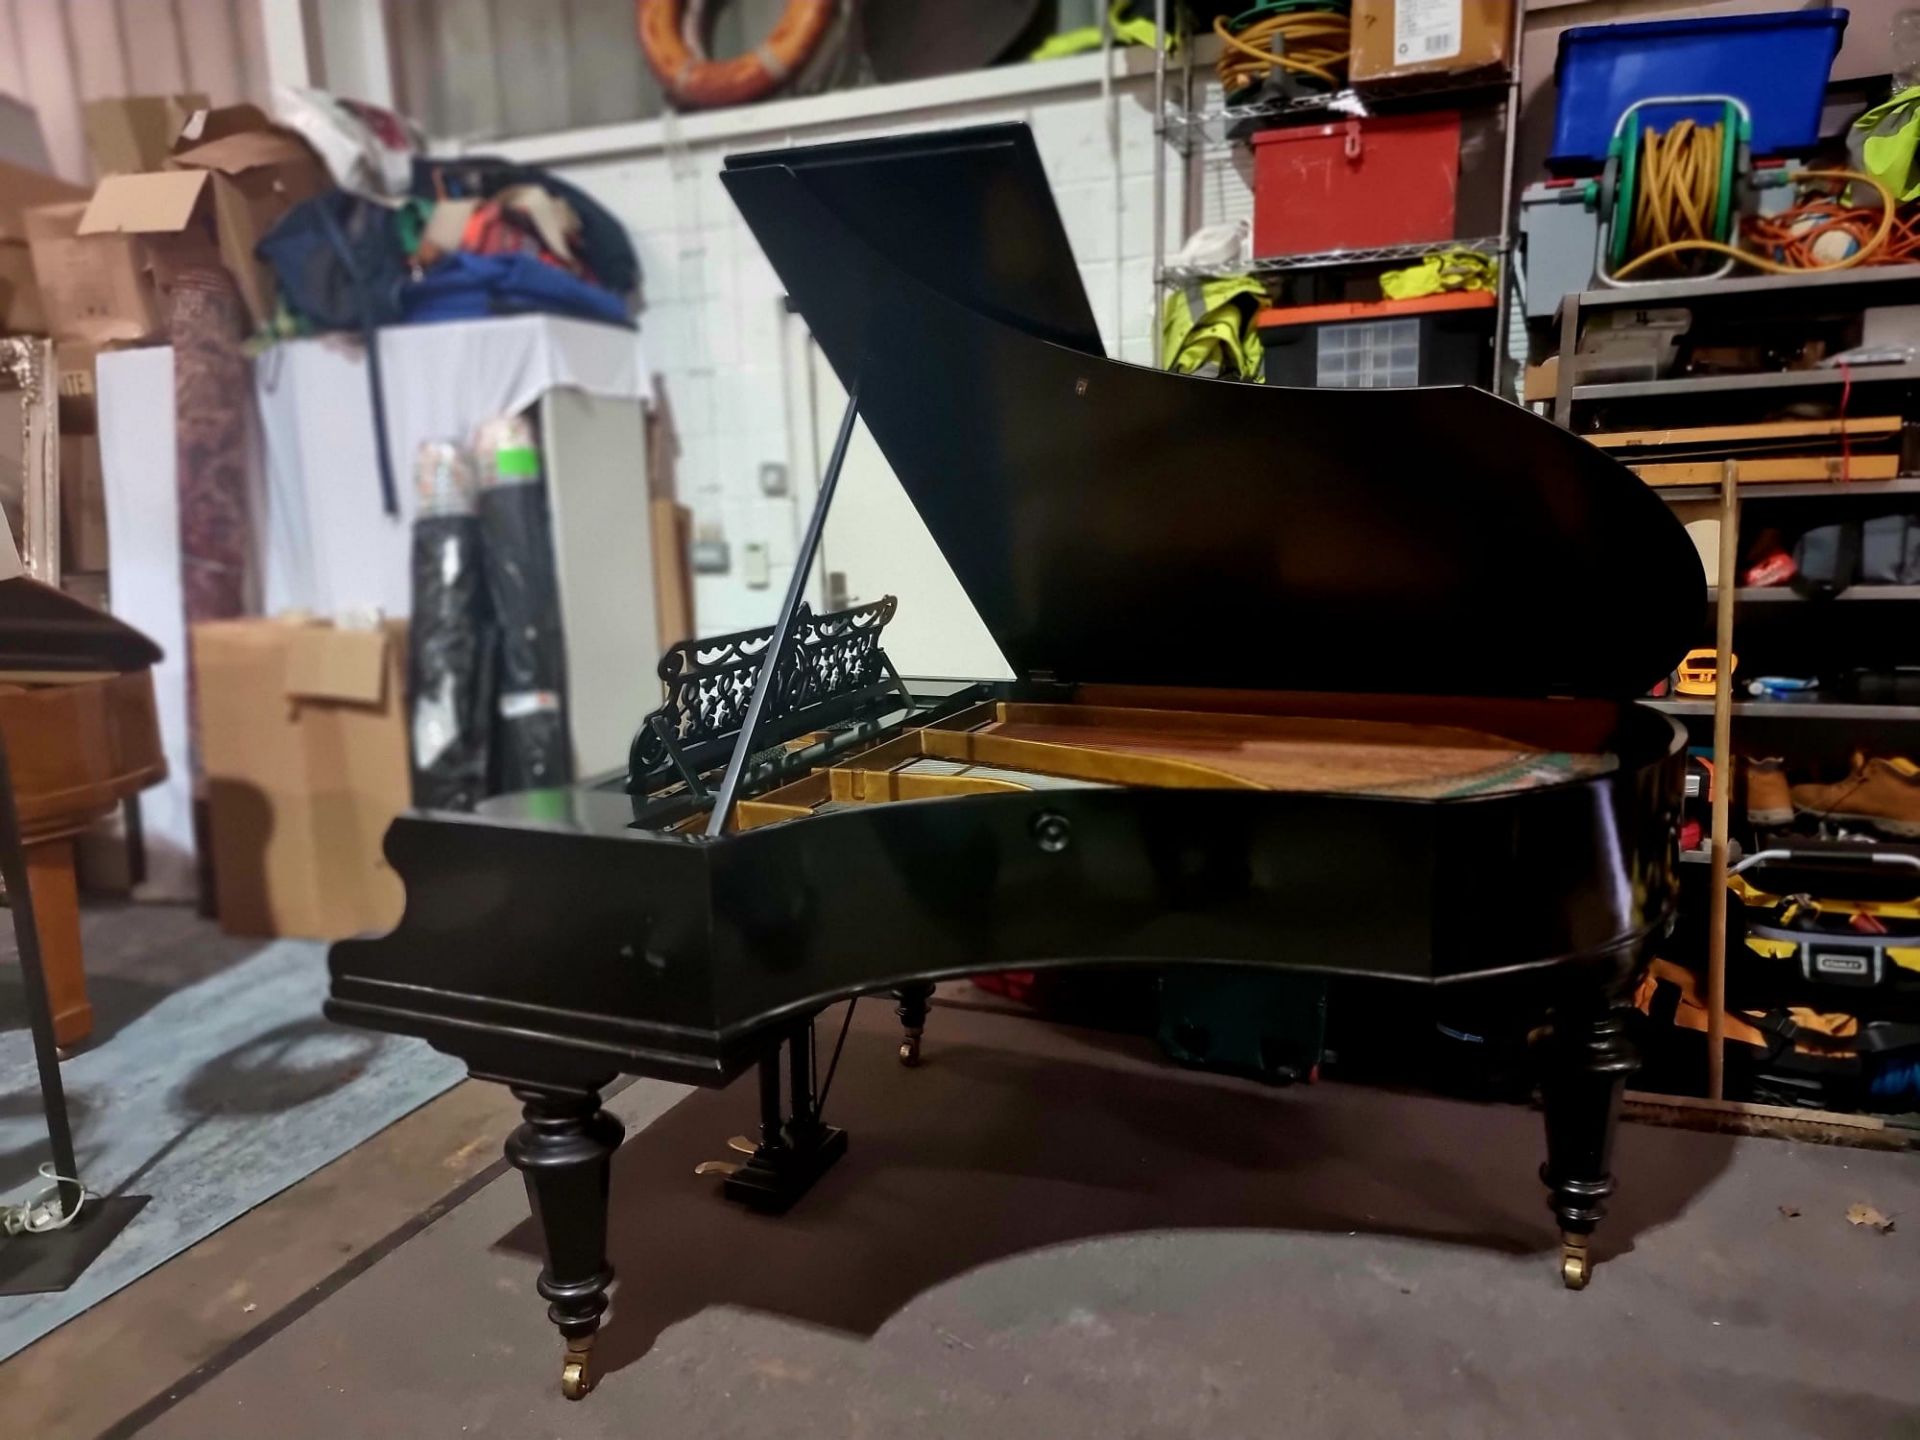 Bechstein Model V Boudoir Grand Piano In Polished Ebony Bechstein Are Widely Regarded As One Of - Bild 4 aus 8